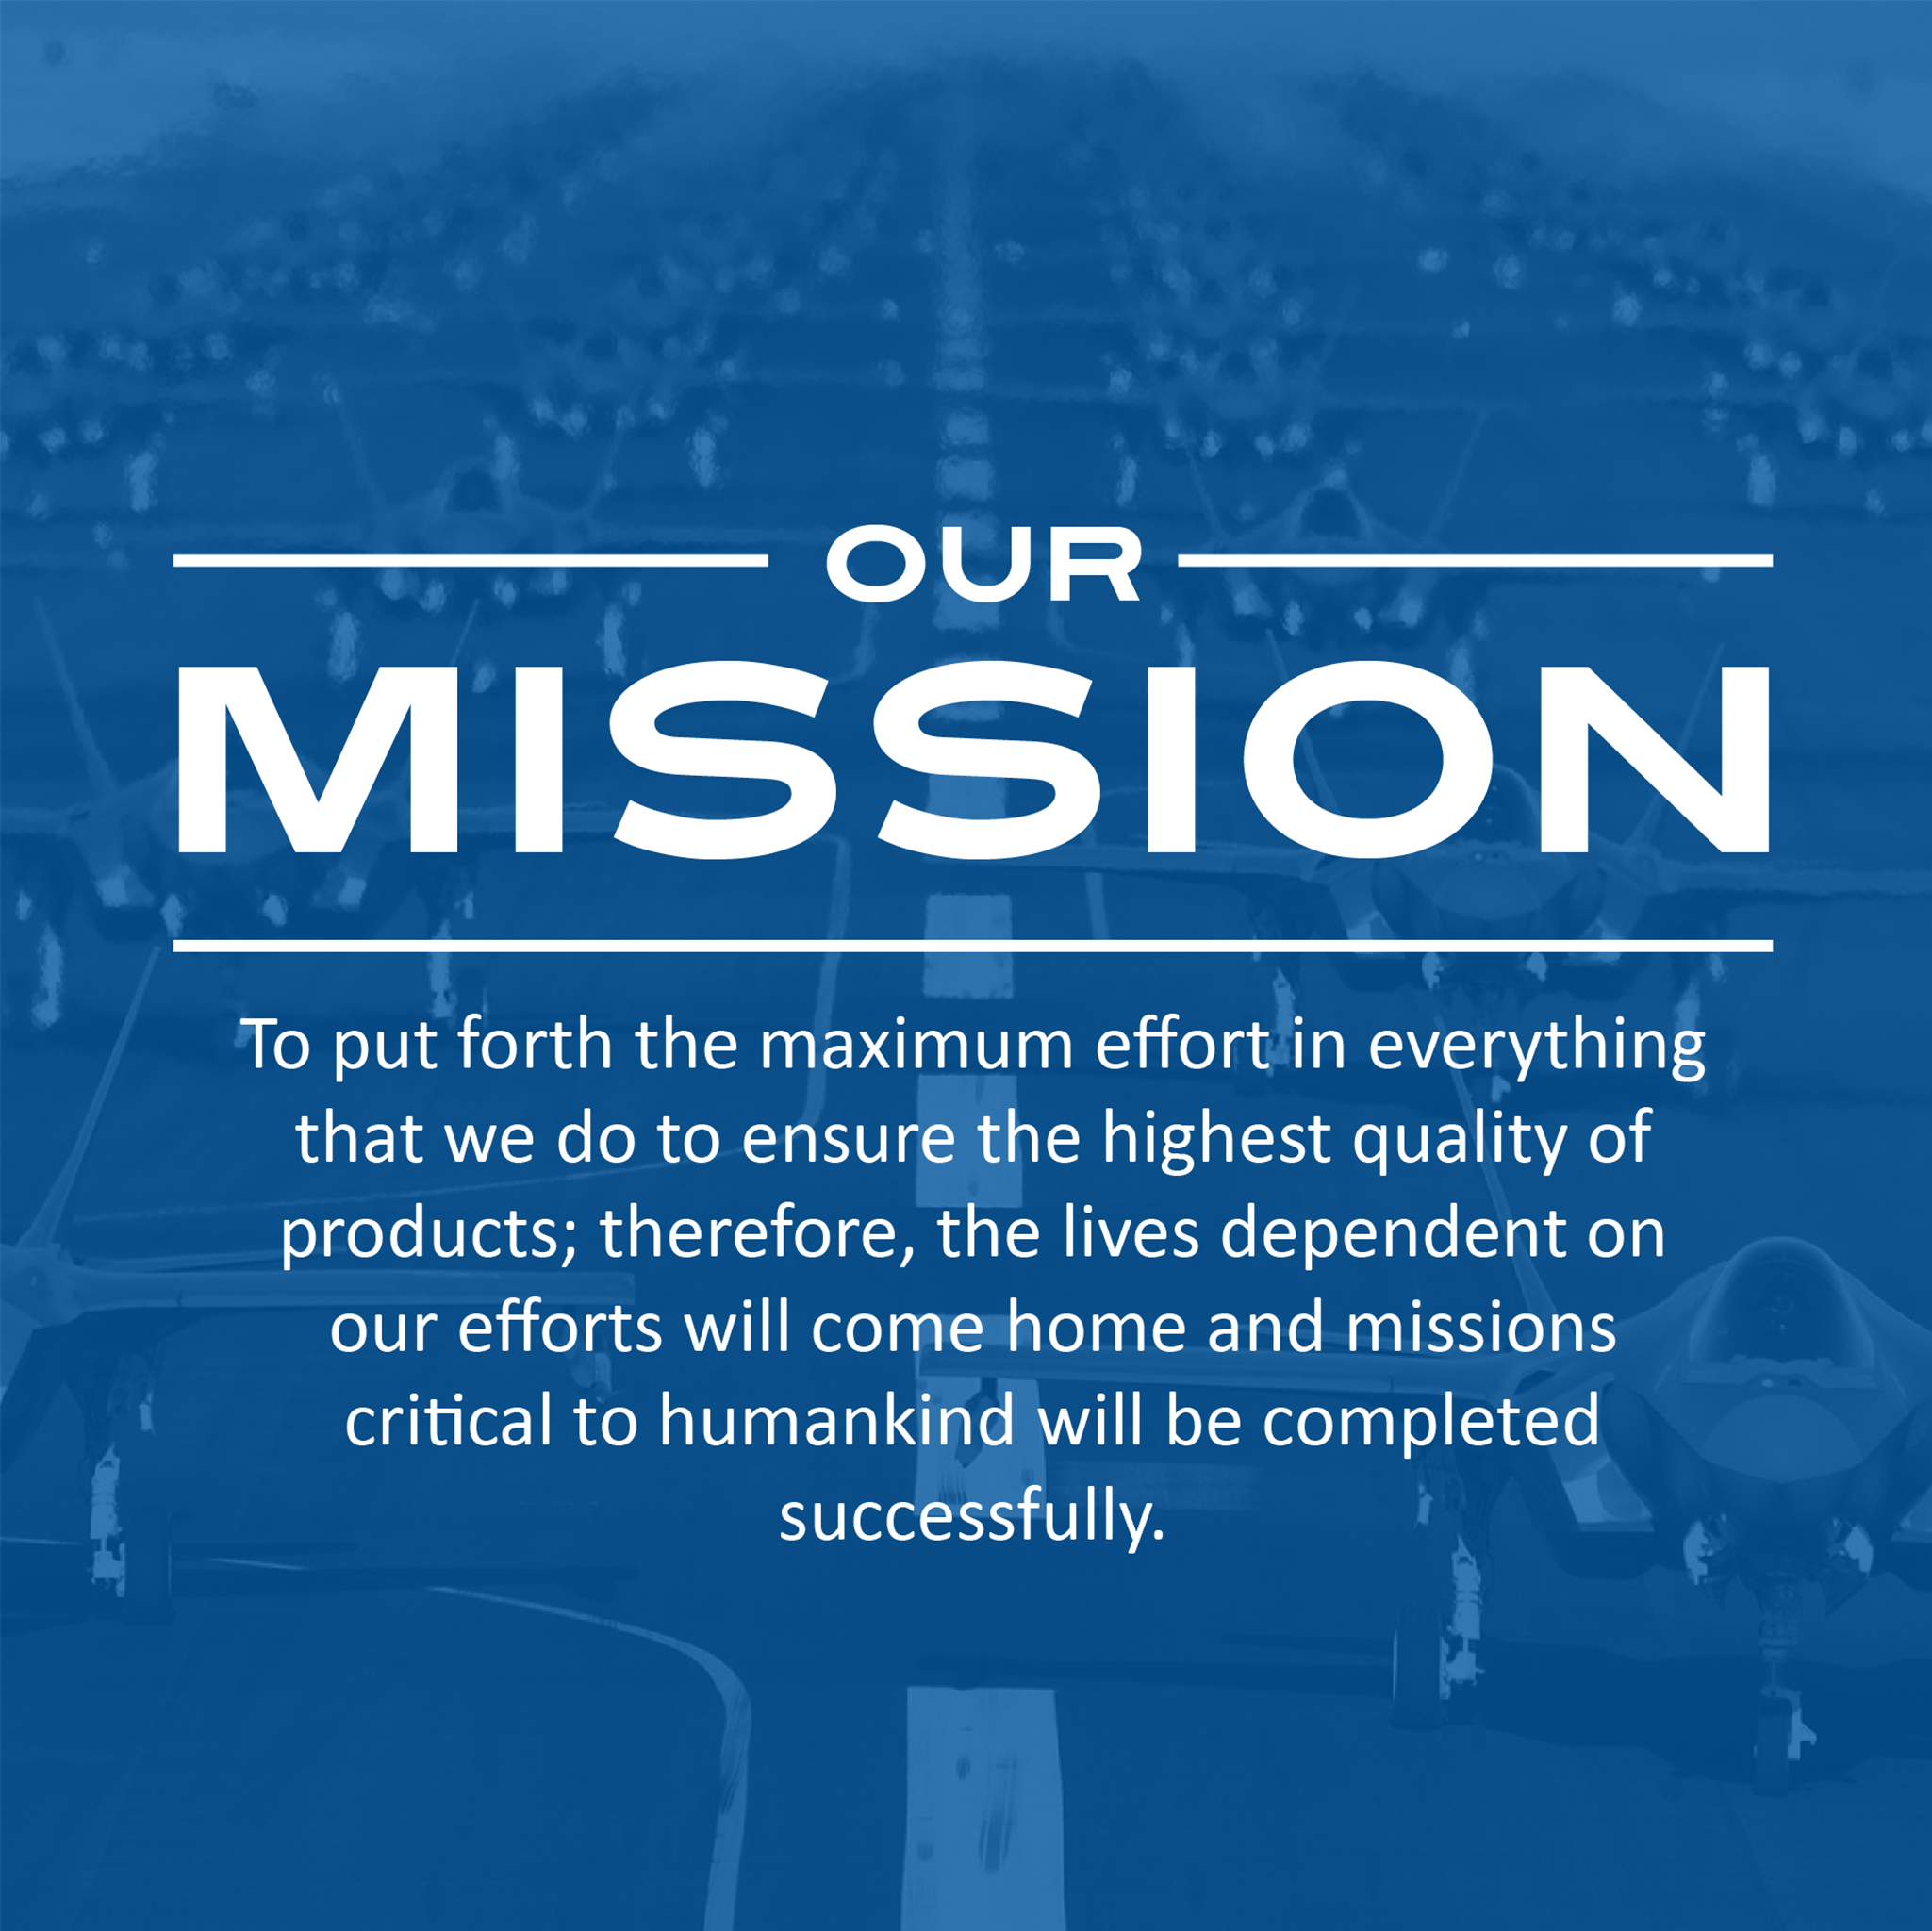 Our Mission is to put forth the maximum effort in everything that we do to ensure the highest quality of products; therefore the lives dependent on our effort will come home and missions critical to humankind will be completed succesfully.